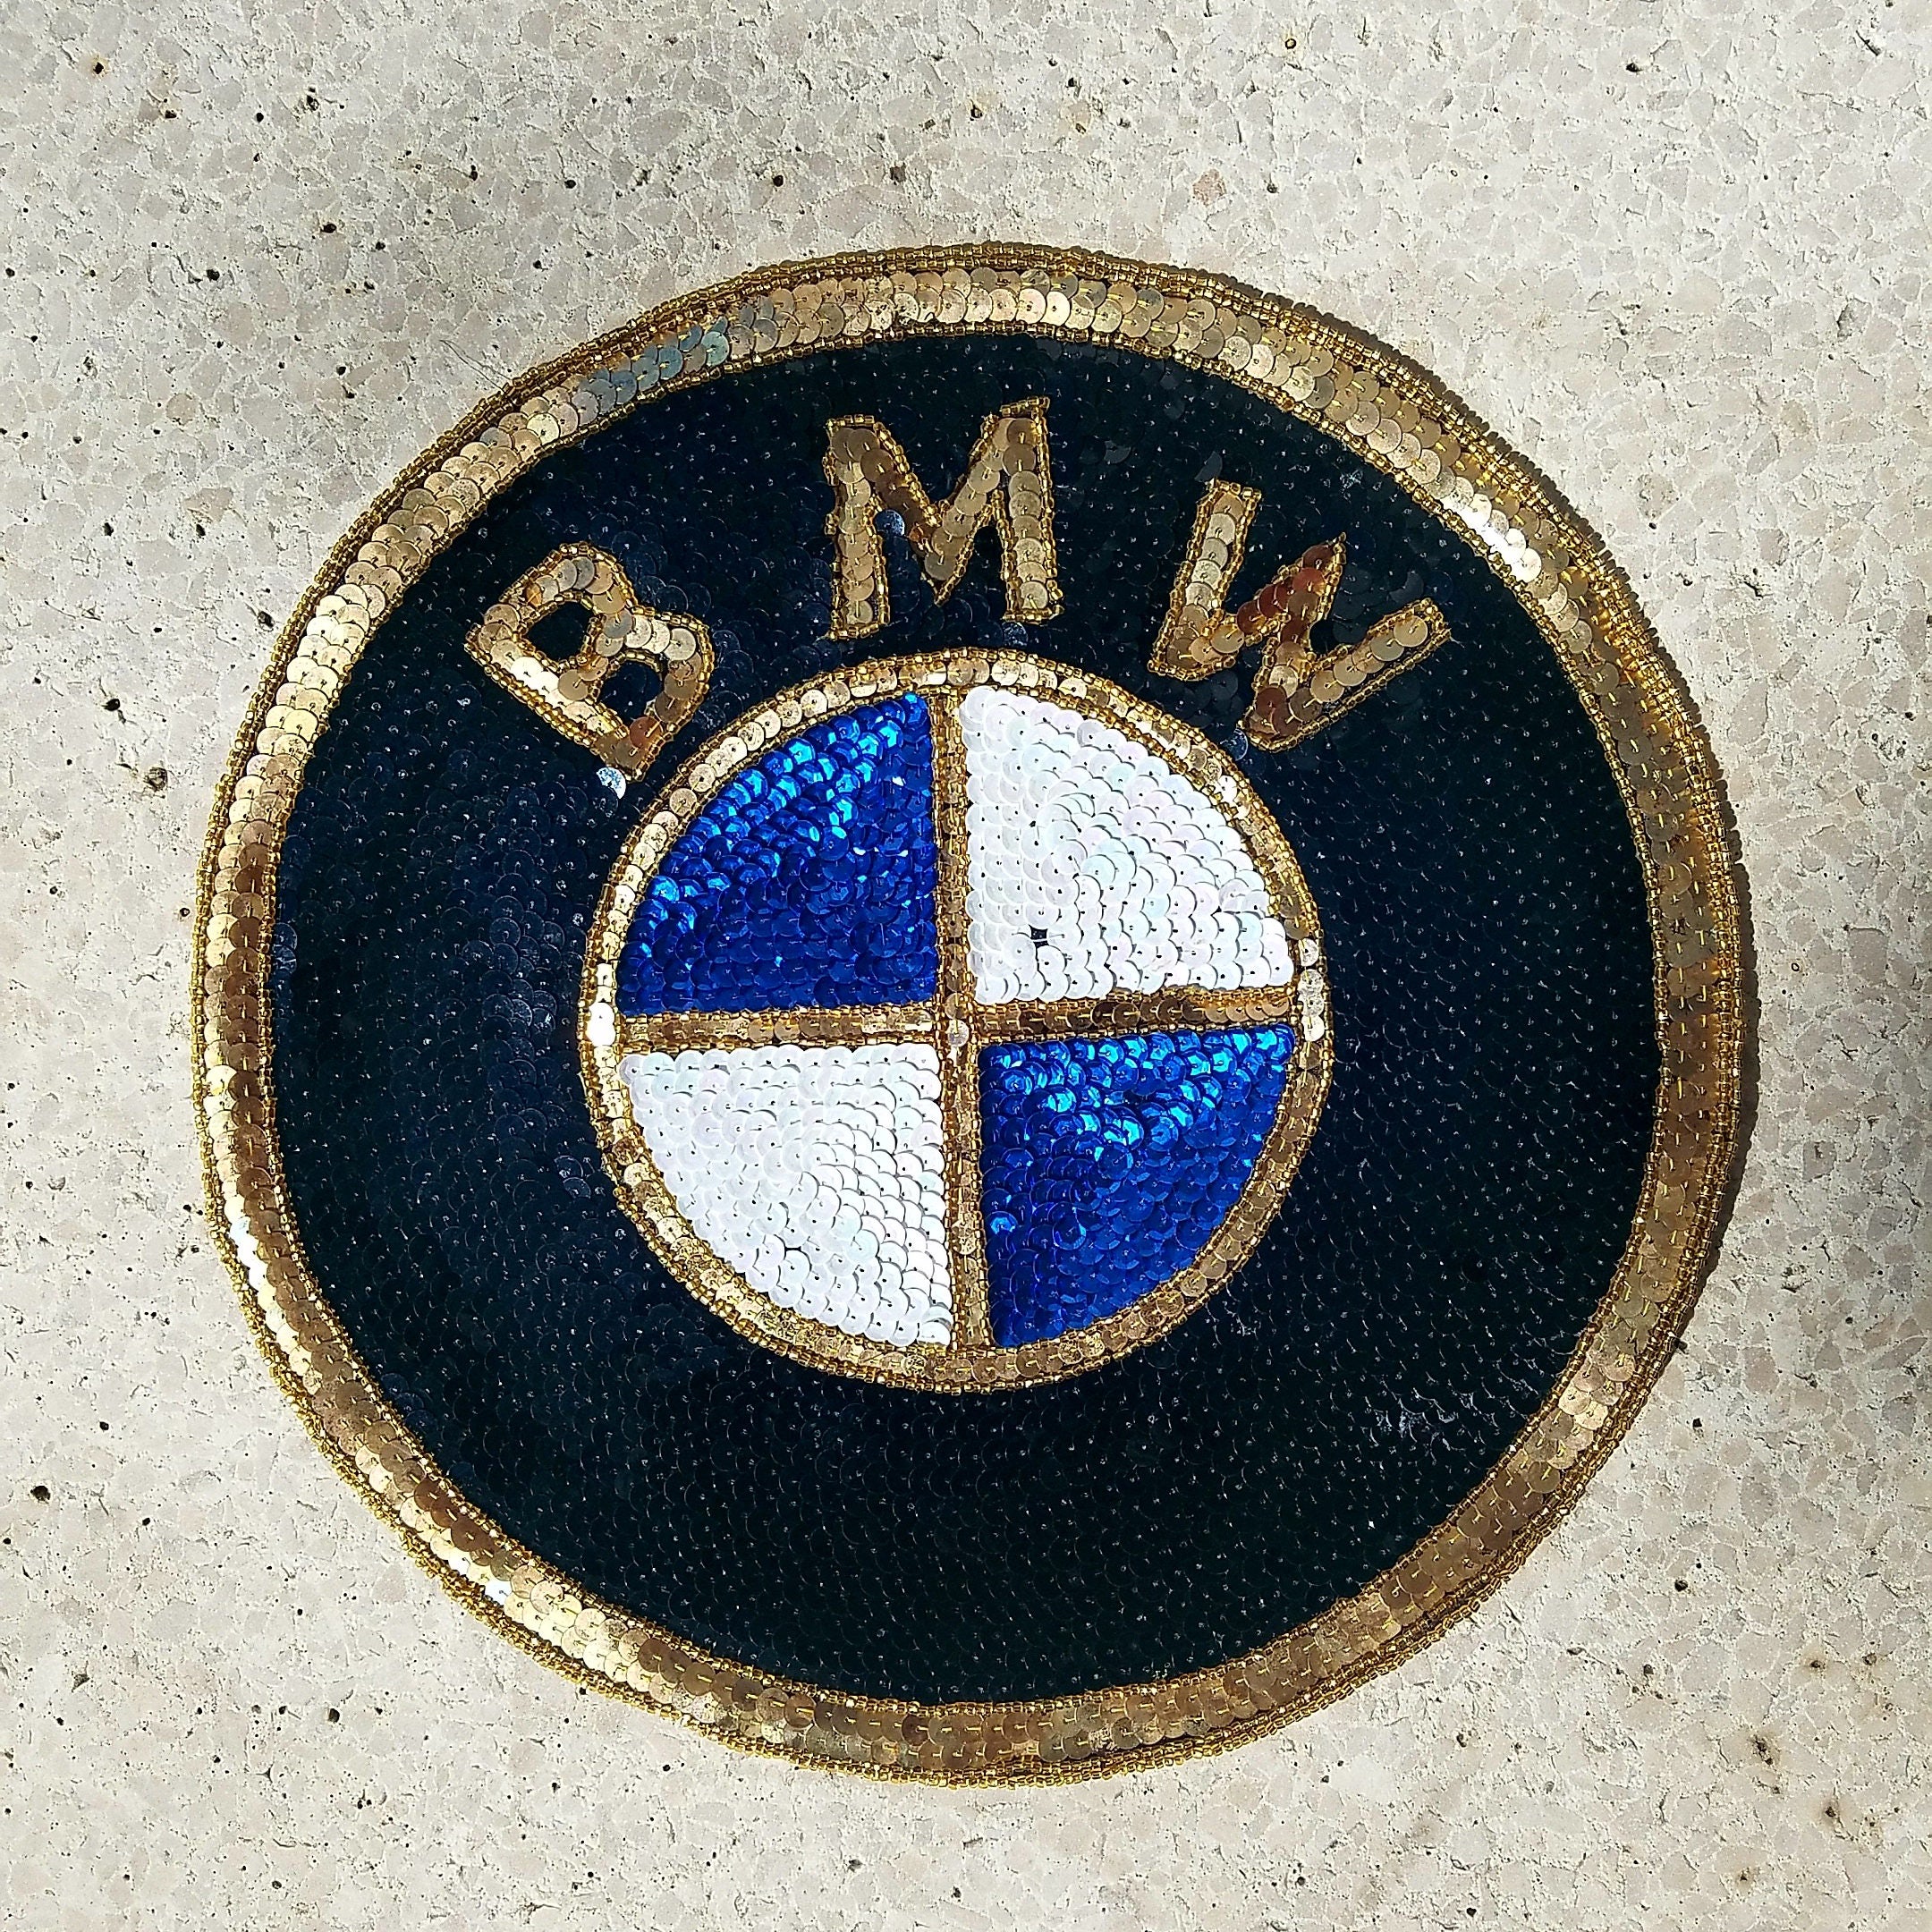 Emblema BMW personalizado - Strass Wars - Bling your world